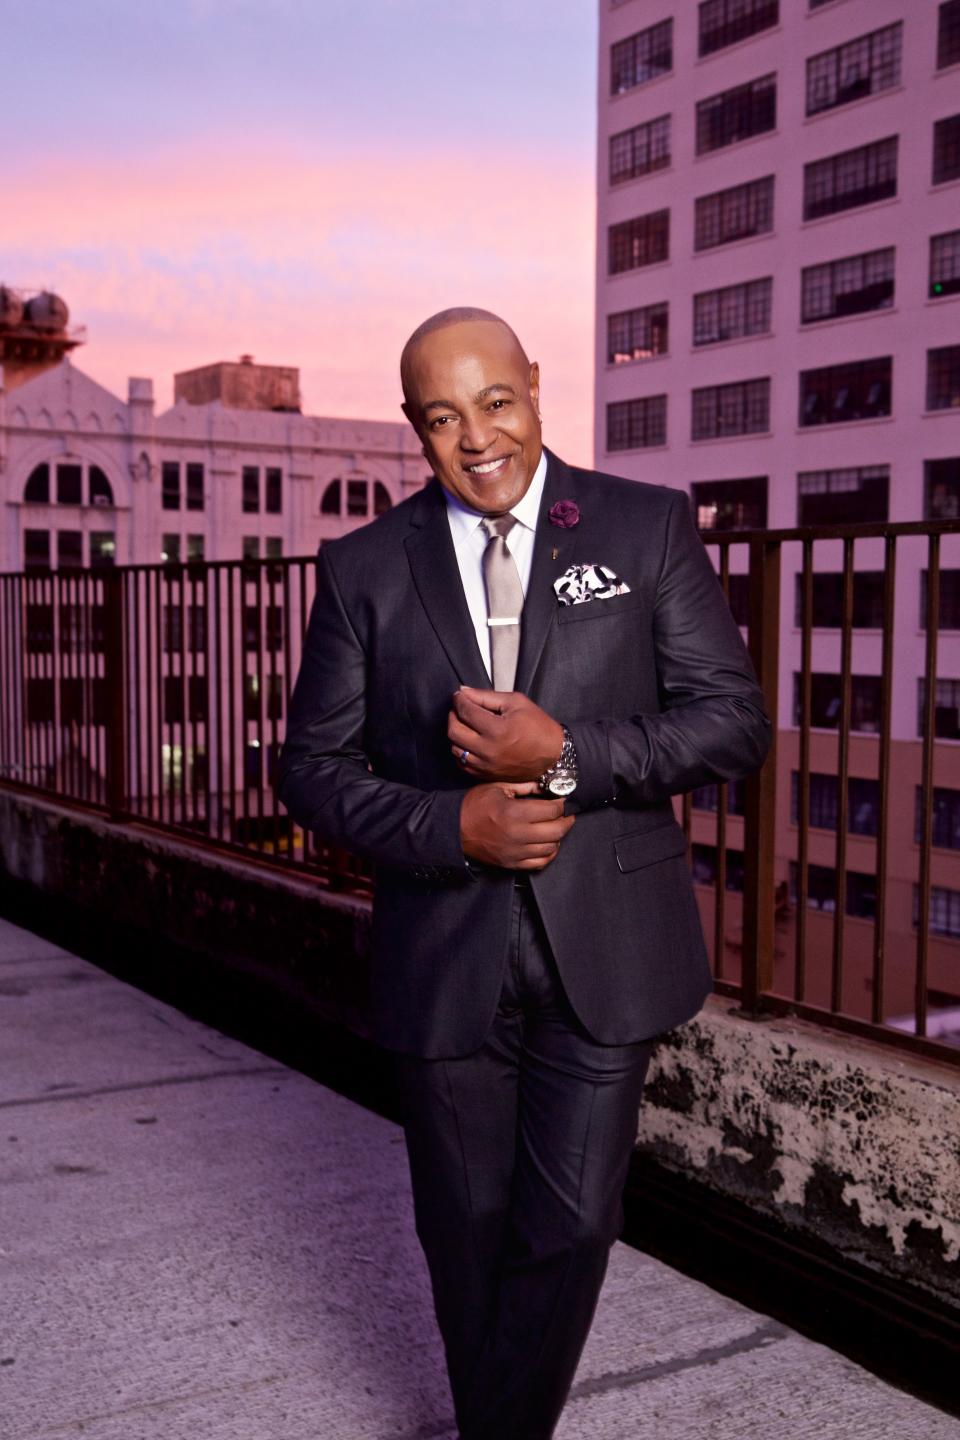 Greenville singer Peabo Bryson wasn't able to perform his May 2019 concert at the Peace Center in Greenville because he suffered a heart attack prior to the event.